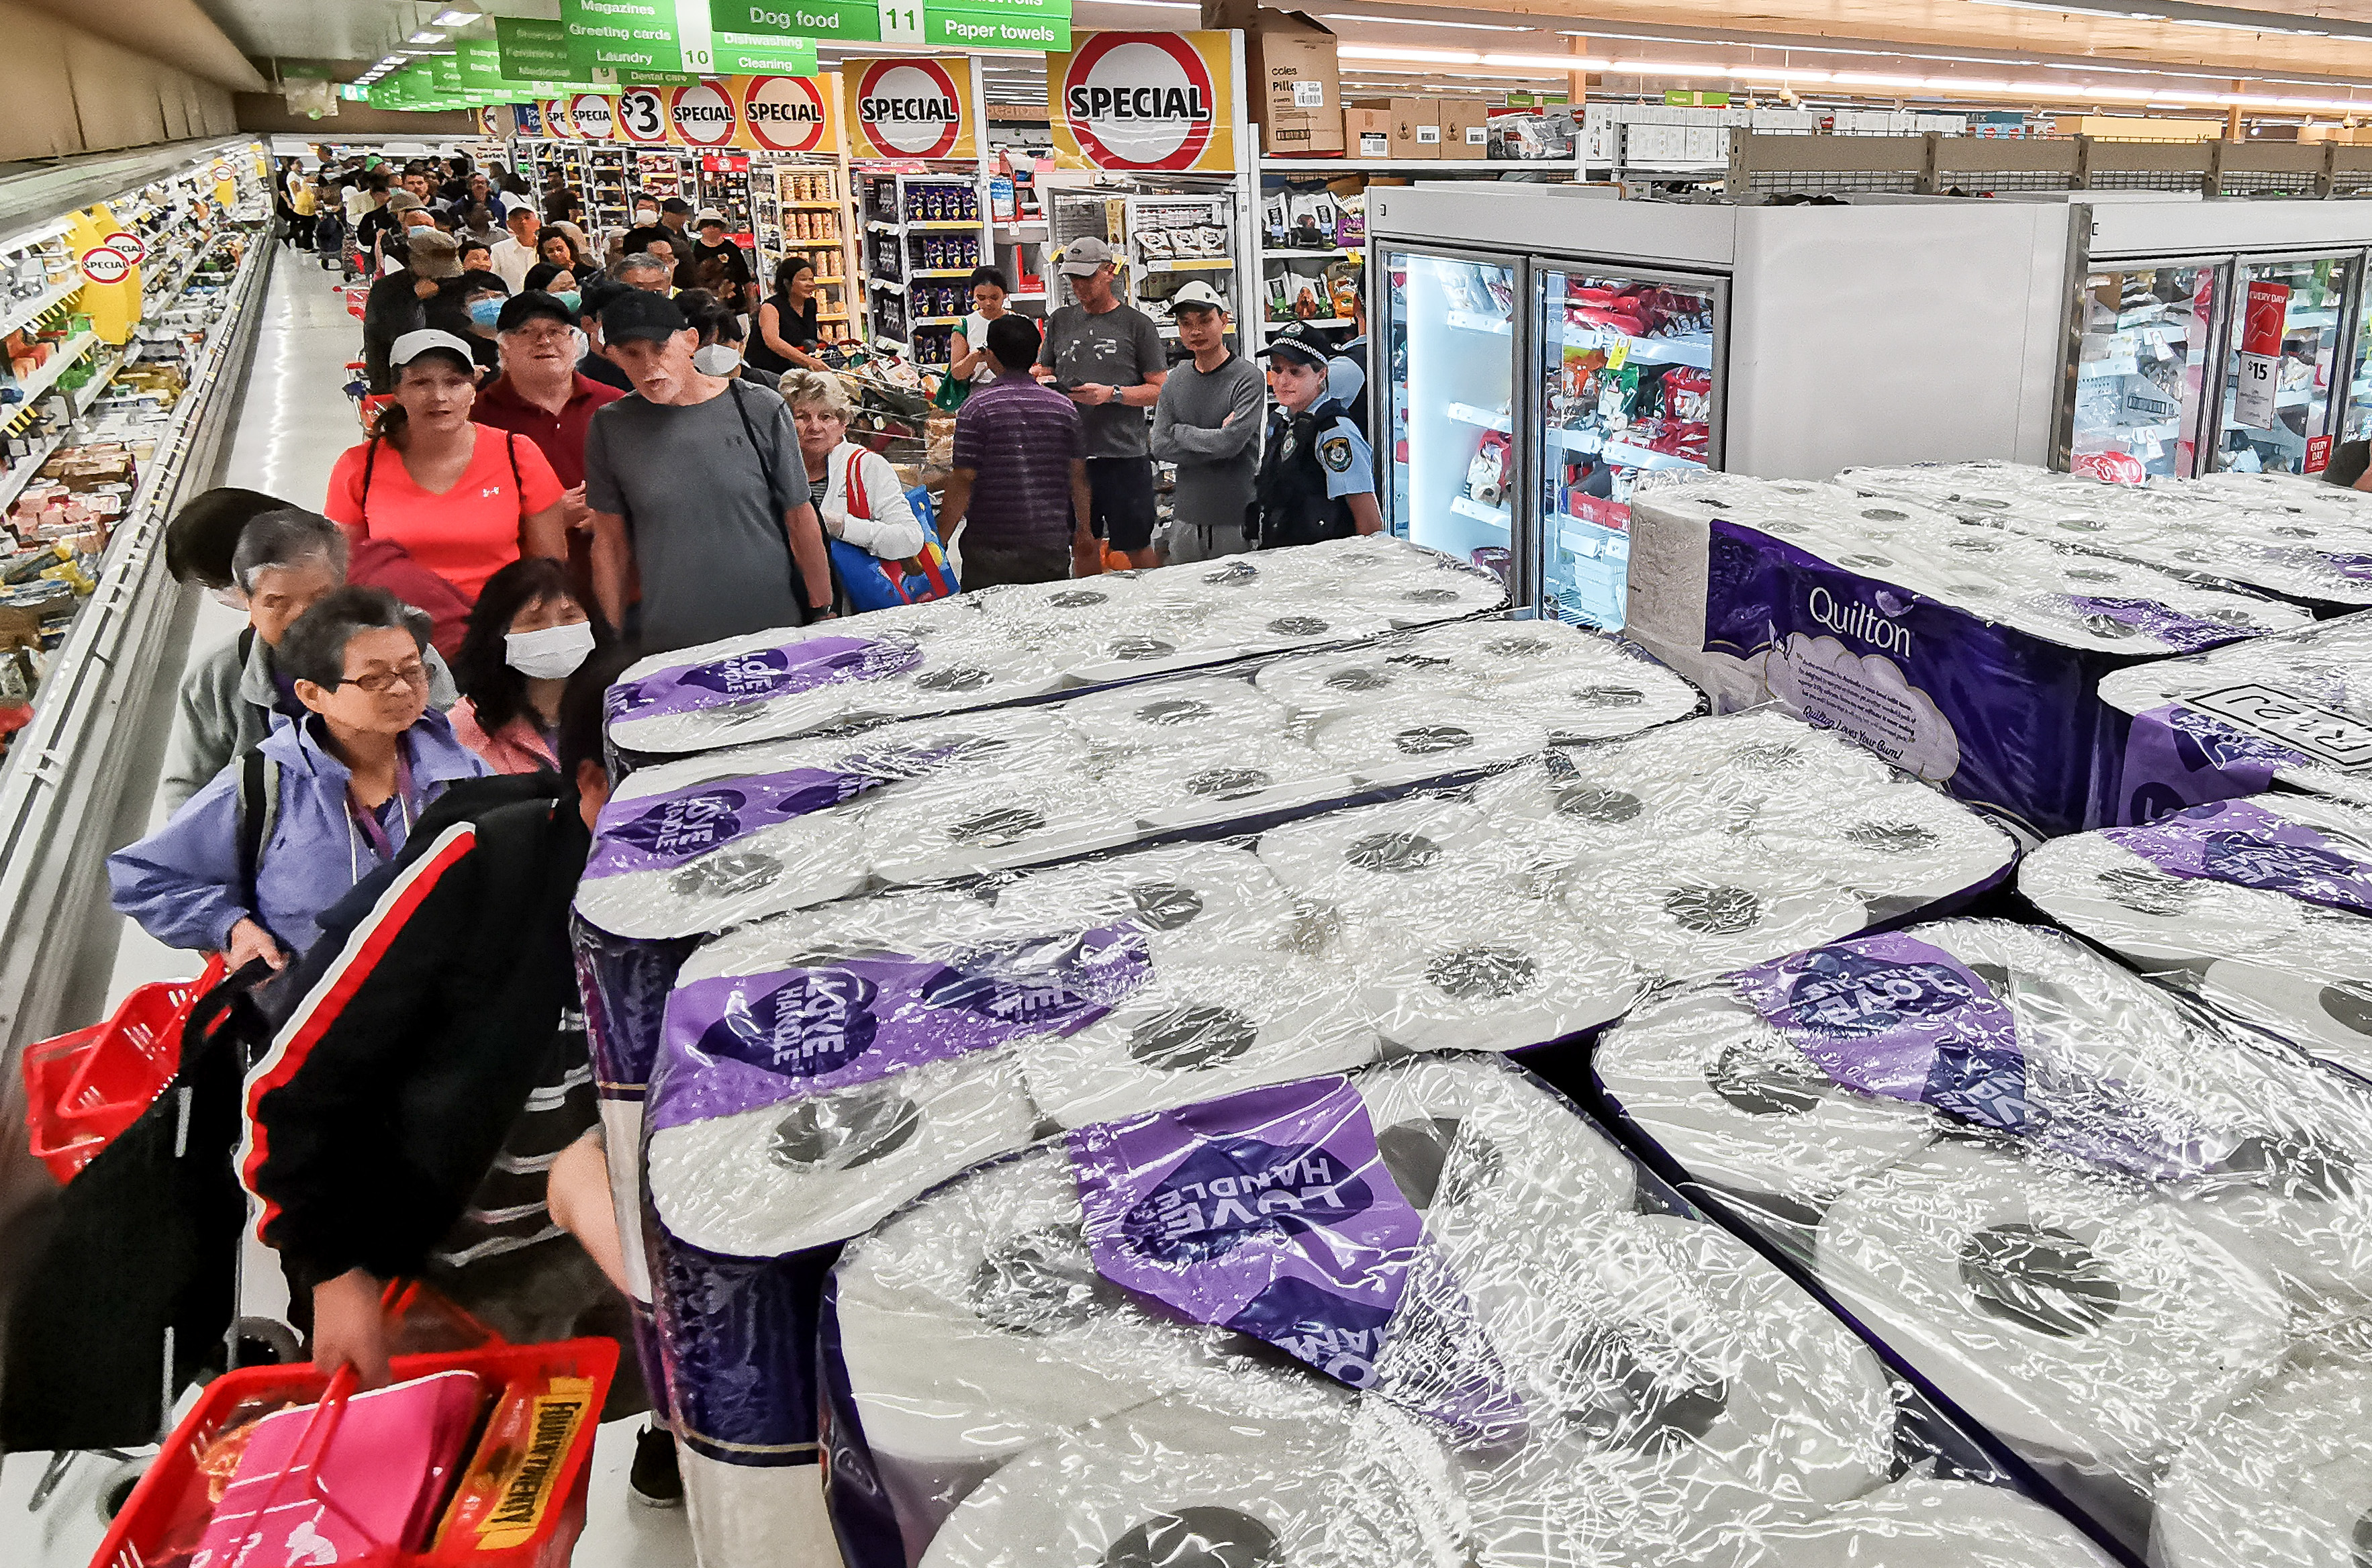 People awaiting their turn to purchase toilet paper, paper towel and pasta at Coles in Epping, Sydney.